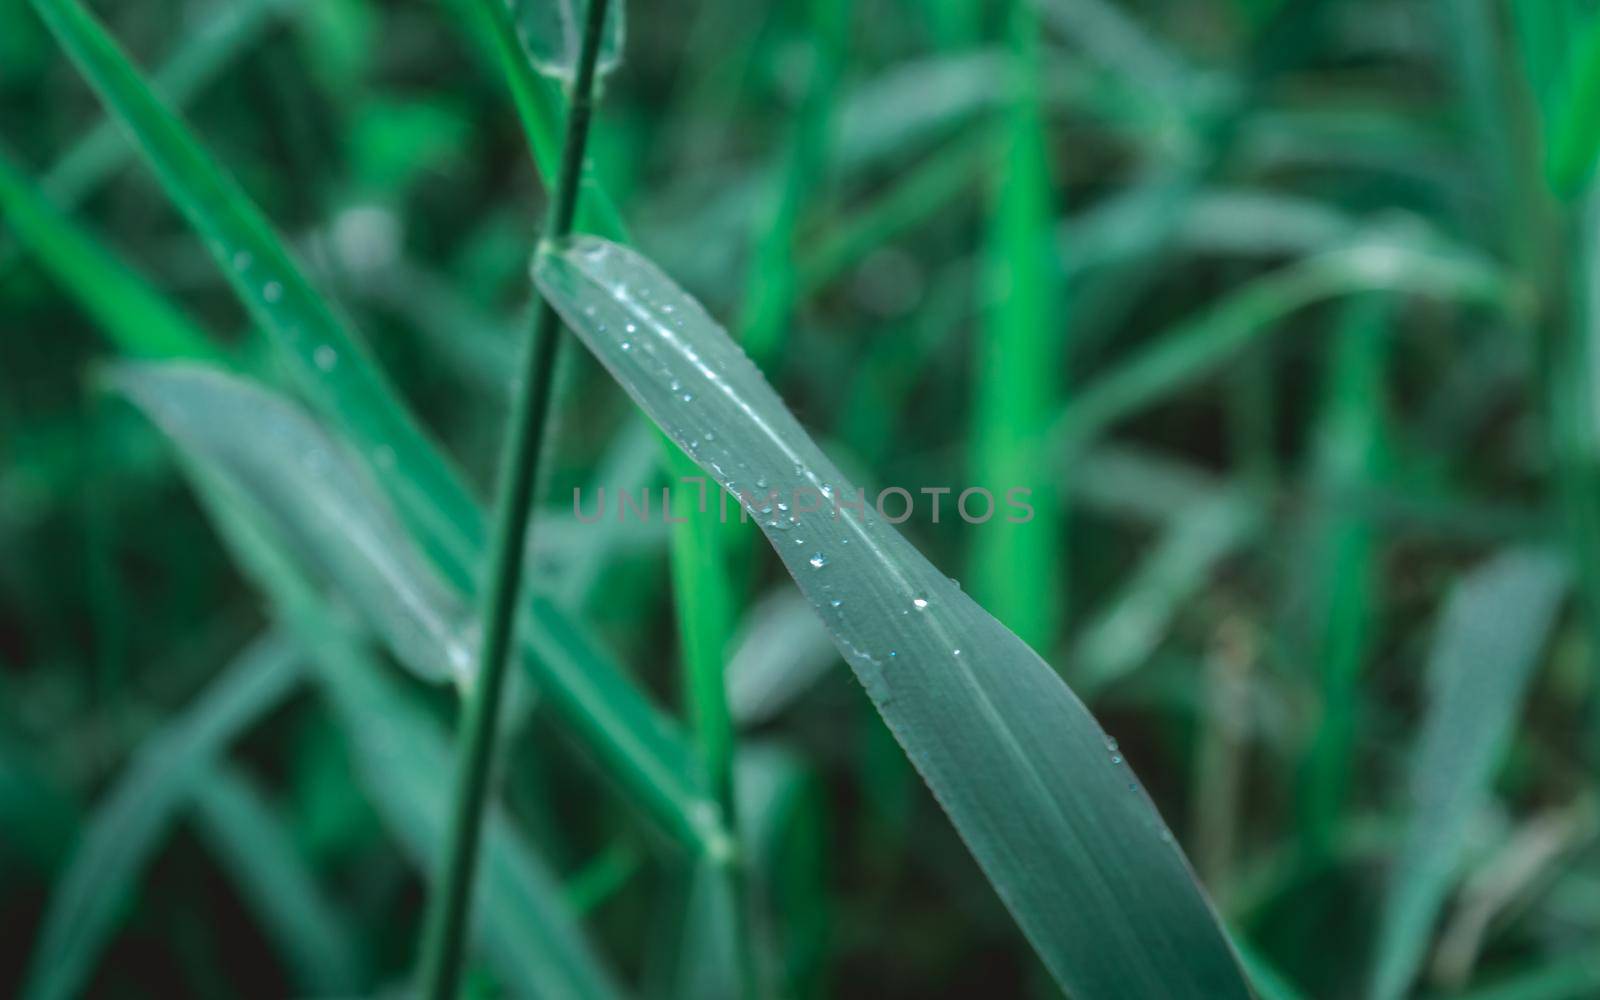 Raindrops on leaf. Rain drop on Leaves. Extreme Close up of rain water dew droplets on blade of grass. Sunlight reflection. Winter rainy season. Beauty in nature abstract background. Macro photography by sudiptabhowmick